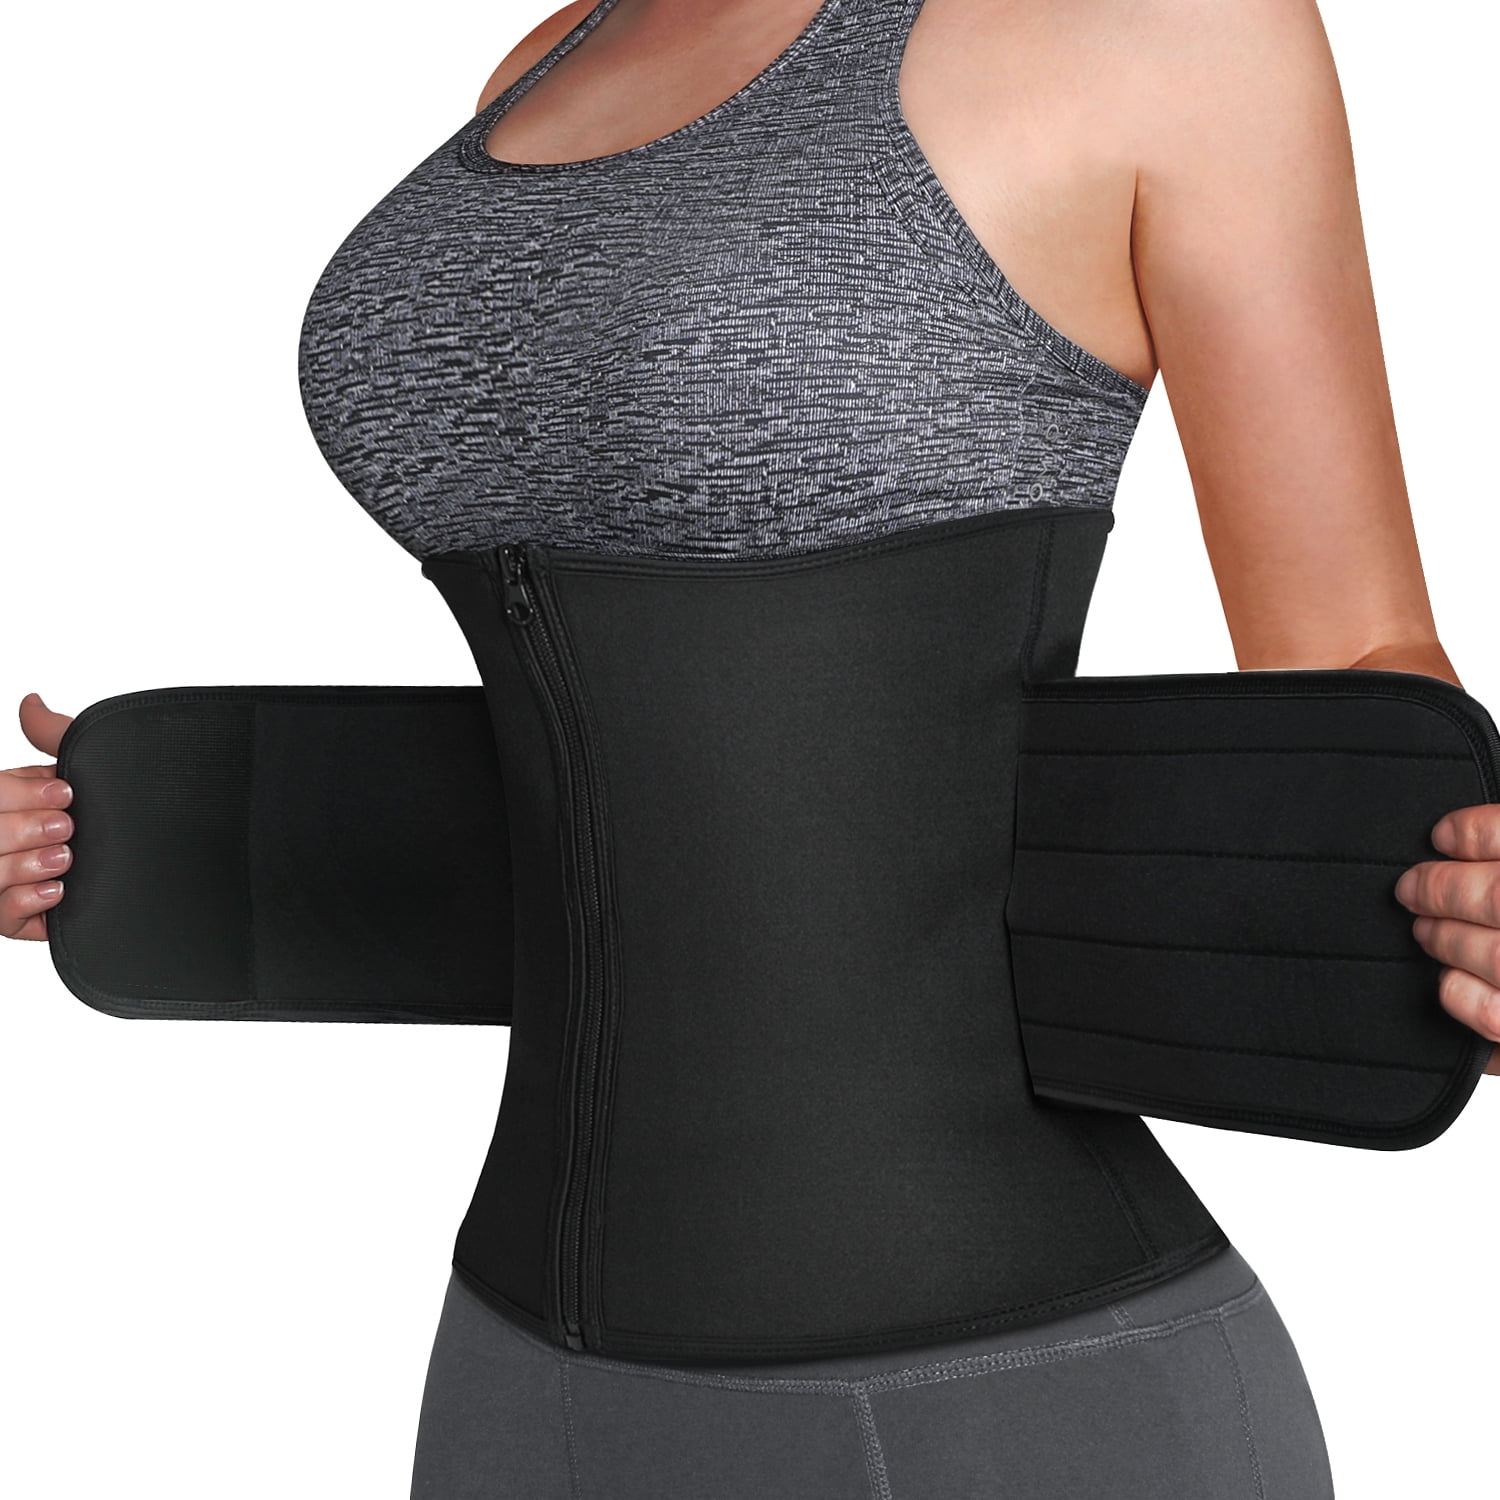 Fitreno Corset Waist Trainer for Women, Sweat Band Waist Trimmer Belt for  Body Shaping(Size S)